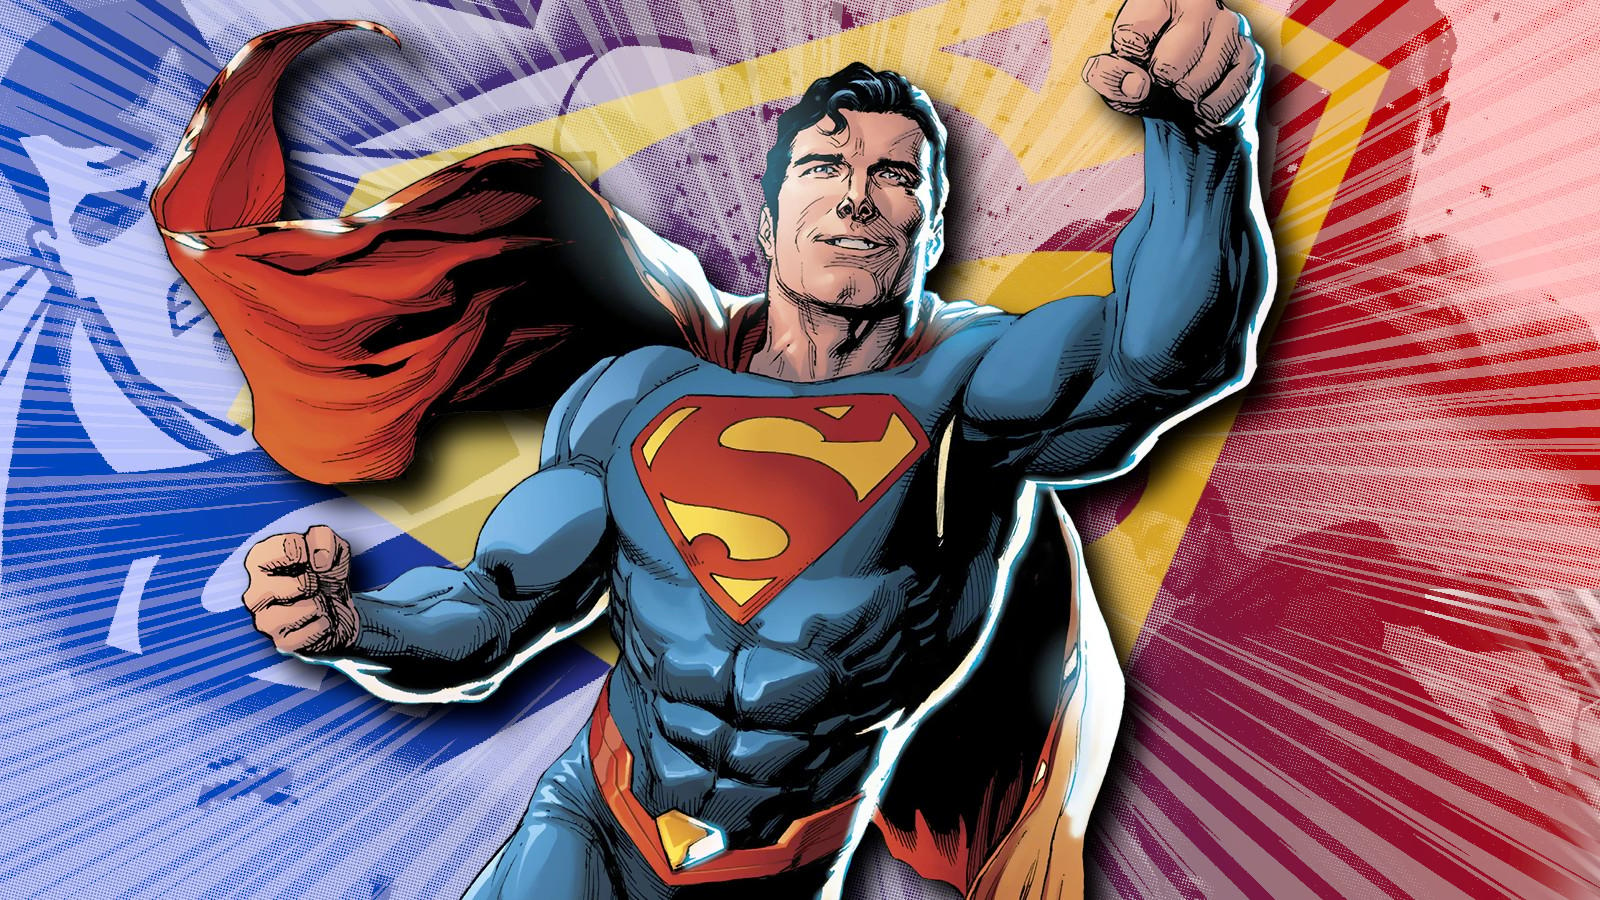 Superman flies at the reader with screenshots from his games in the background